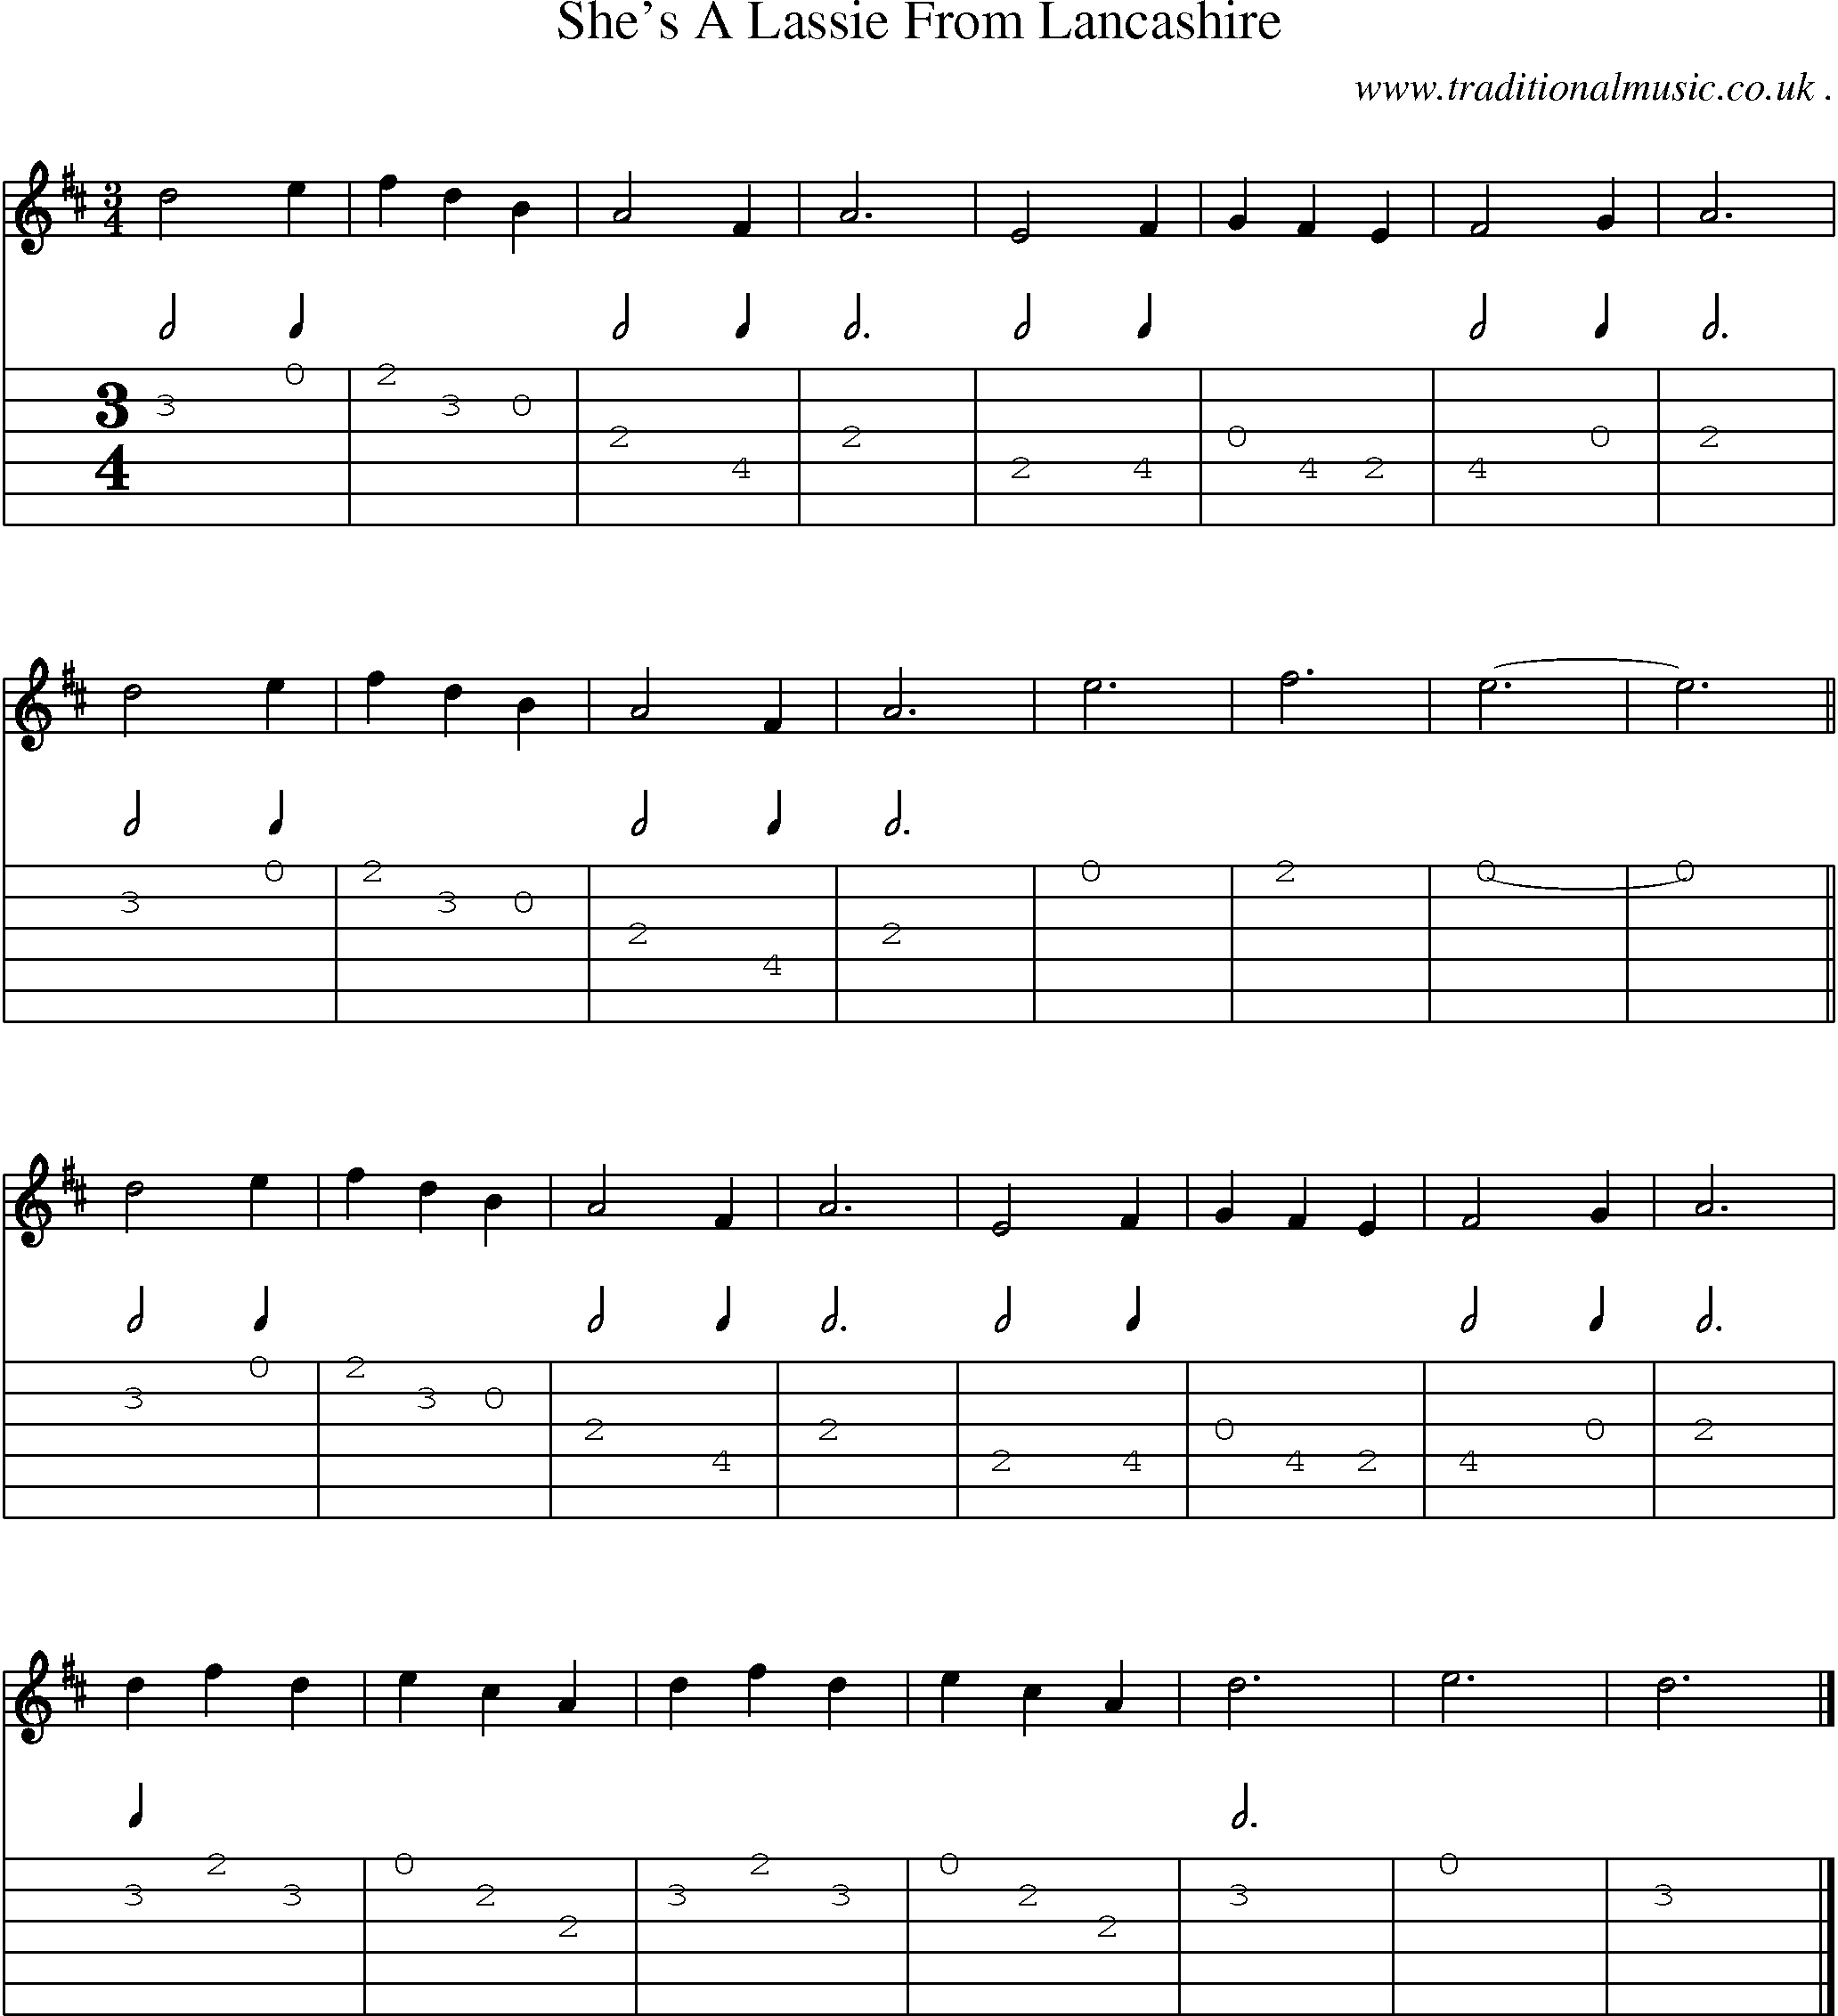 Sheet-music  score, Chords and Guitar Tabs for Shes A Lassie From Lancashire